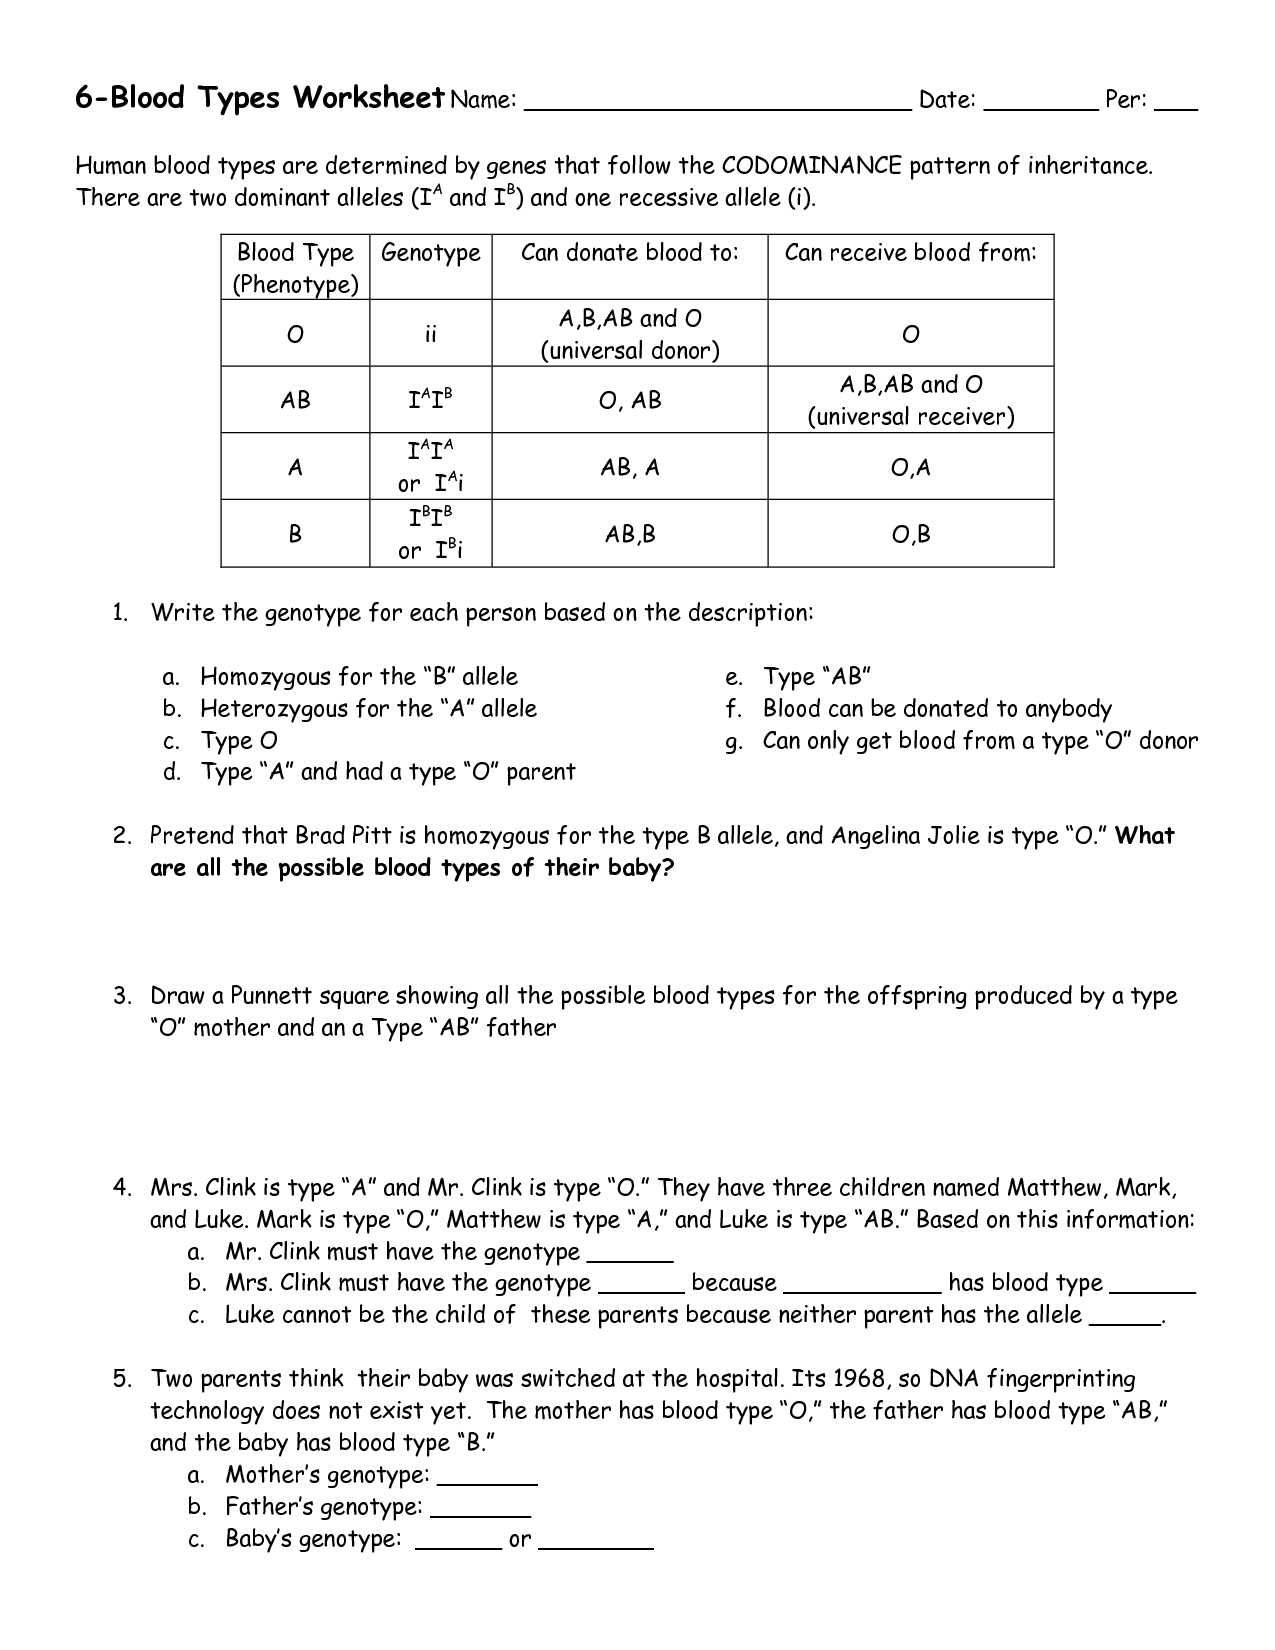 Factor Each Completely Worksheet Answers Along with Erfreut Anatomy and Physiology Chapter 10 Blood Worksheet Answers